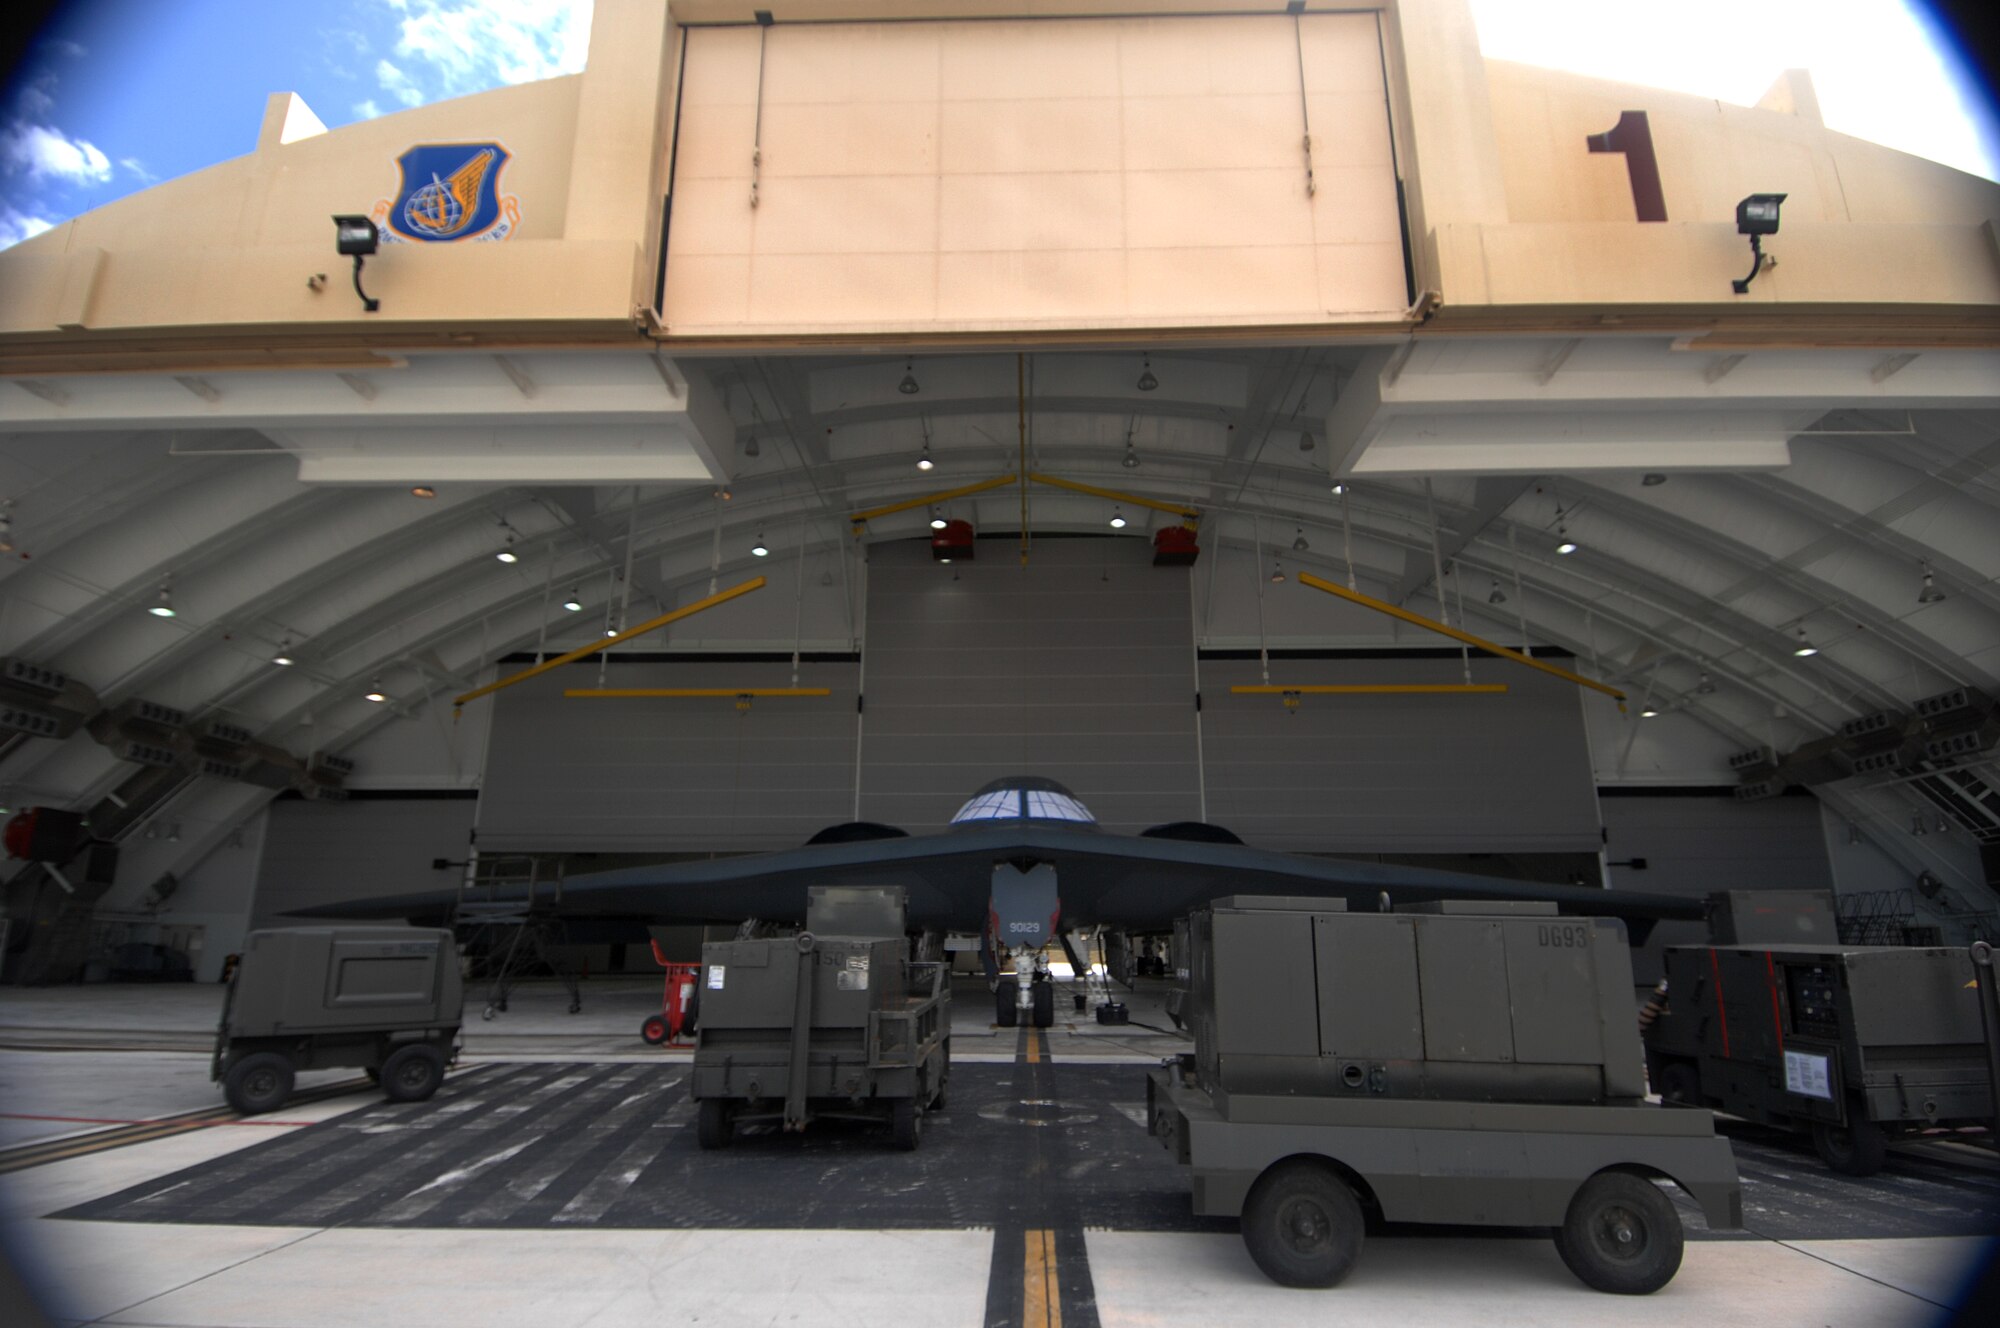 ANDERSEN AIR FORCE BASE, Guam -- A B-2 Spirit stealth bomber is hooked up to aerospace ground equipment by a maintenance team supporting the remaining B-2 Spirits at Andersen AFB. The equipment provides the jet’s power supply while the team performs weekly checks to ensure the B-2 Spirit bomber stays at a mission-ready status. This requires lots of hard work and a huge team effort by all maintainers working on the multi-role stealth bomber. The B-2s here have remained suspended pending the results from a safety investigation board following the first-ever crash of a stealth bomber Feb. 23 here, at Andersen AFB.  The Maintainers are from the 36th Expeditionary Aircraft Maintenance Squadron and are deployed from the 509th Bomb Wing, Whiteman, AFB, Mo. (U.S. Air Force photo by Staff Sgt. Vanessa Valentine)
